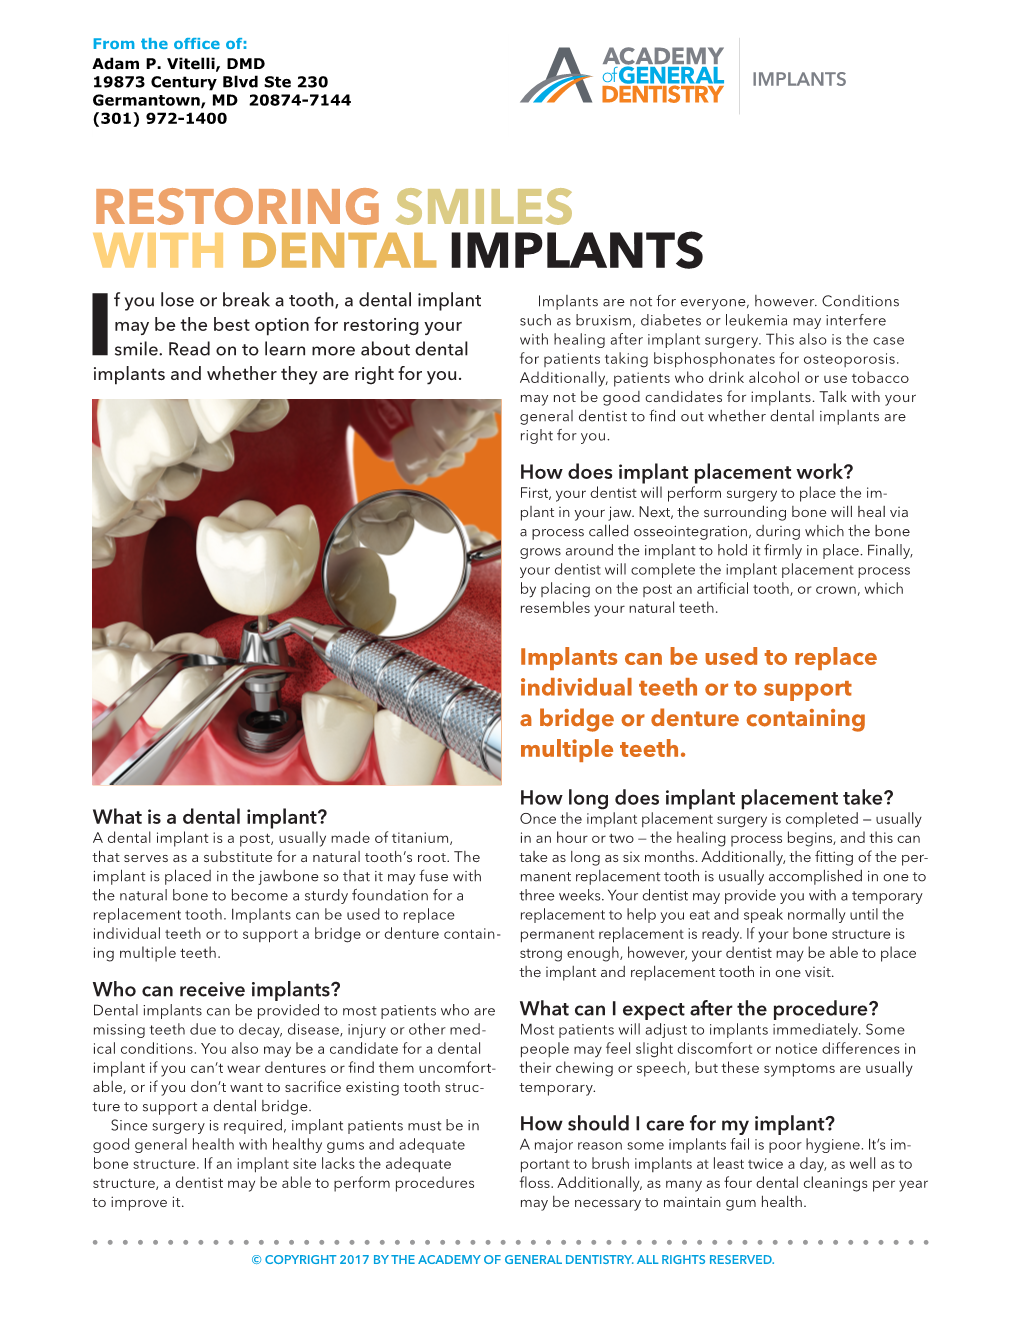 RESTORING SMILES with DENTAL IMPLANTS F You Lose Or Break a Tooth, a Dental Implant Implants Are Not for Everyone, However